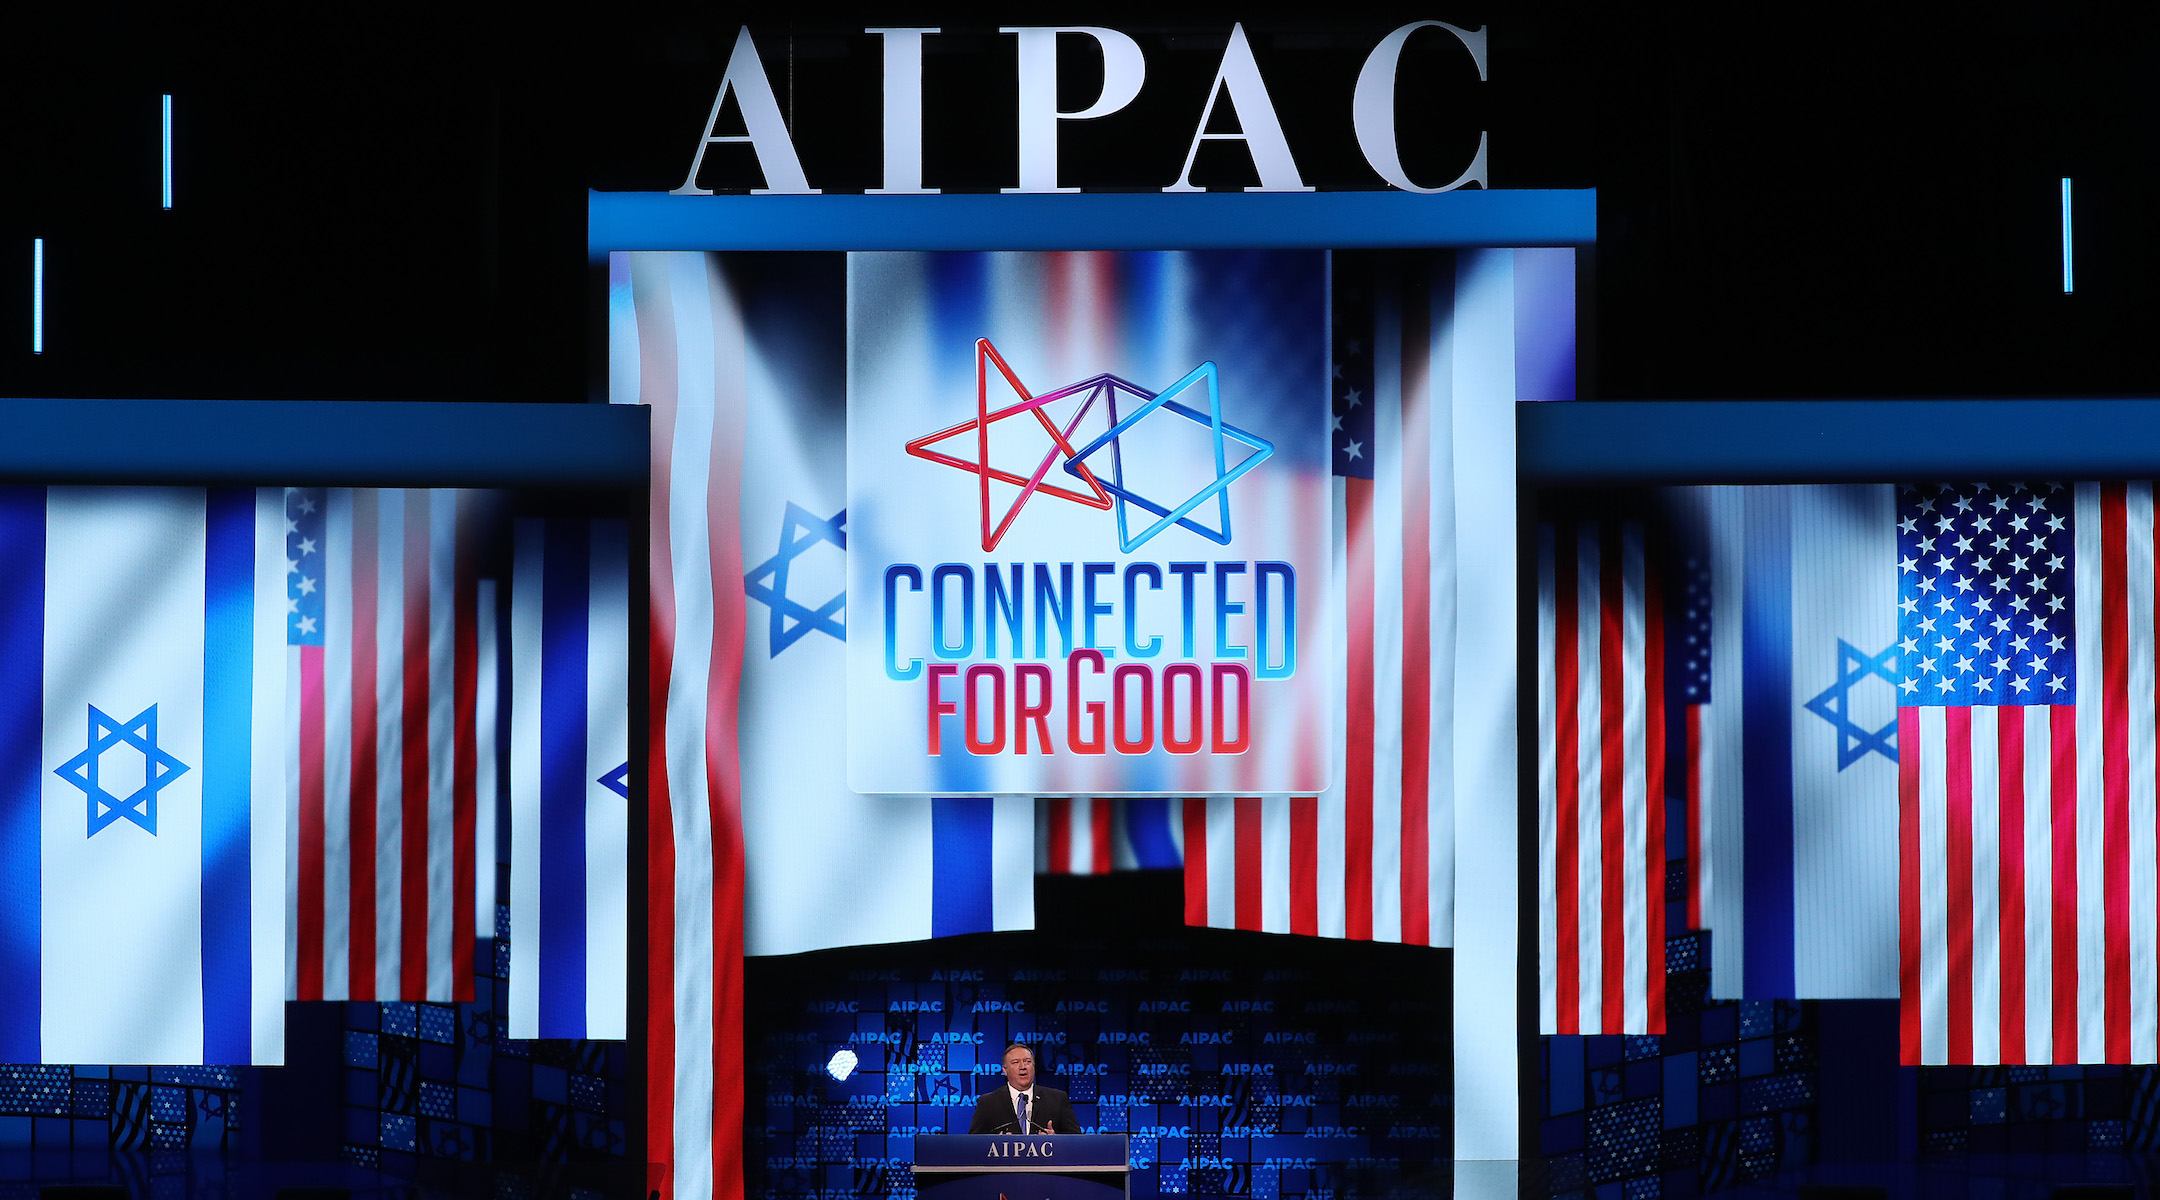 U.S. Secretary of State Mike Pompeo speaks at the annual American Israel Public Affairs Committee (AIPAC) conference in Washington, D.C., on March 25, 2019.